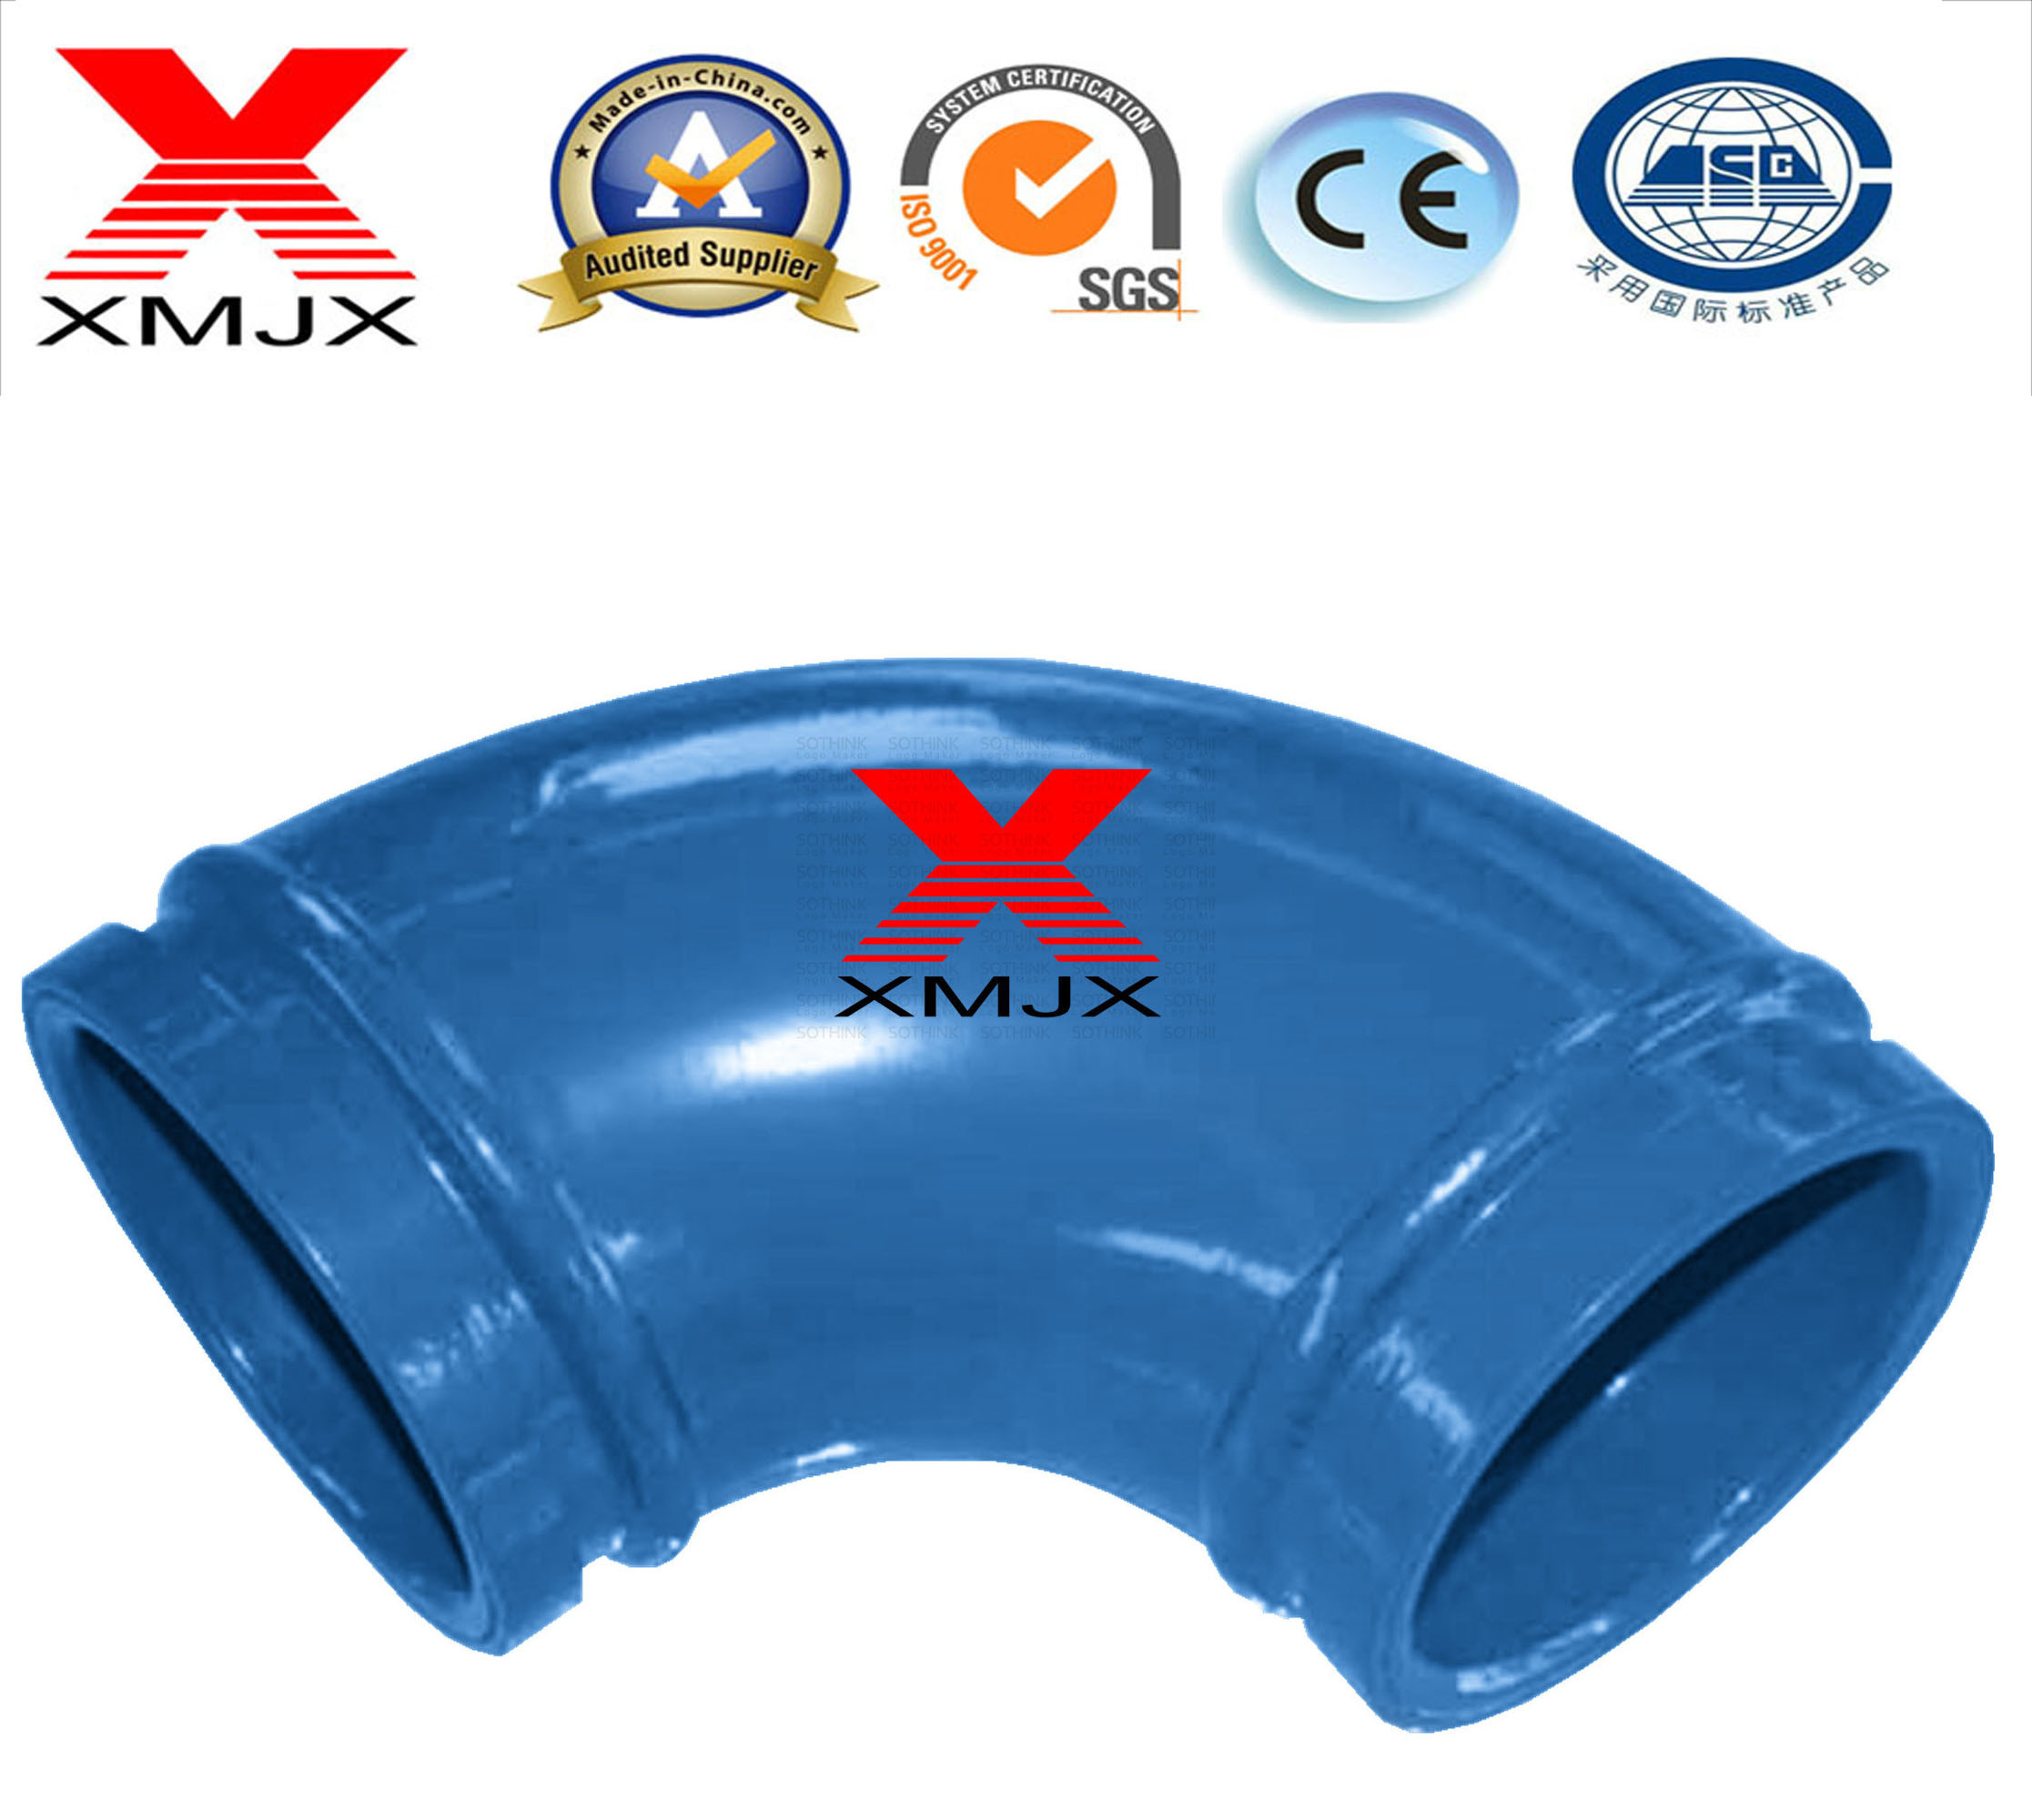 Hebei Ximai Machinery Offering Twin Wall Elbow in Covid19 Moments